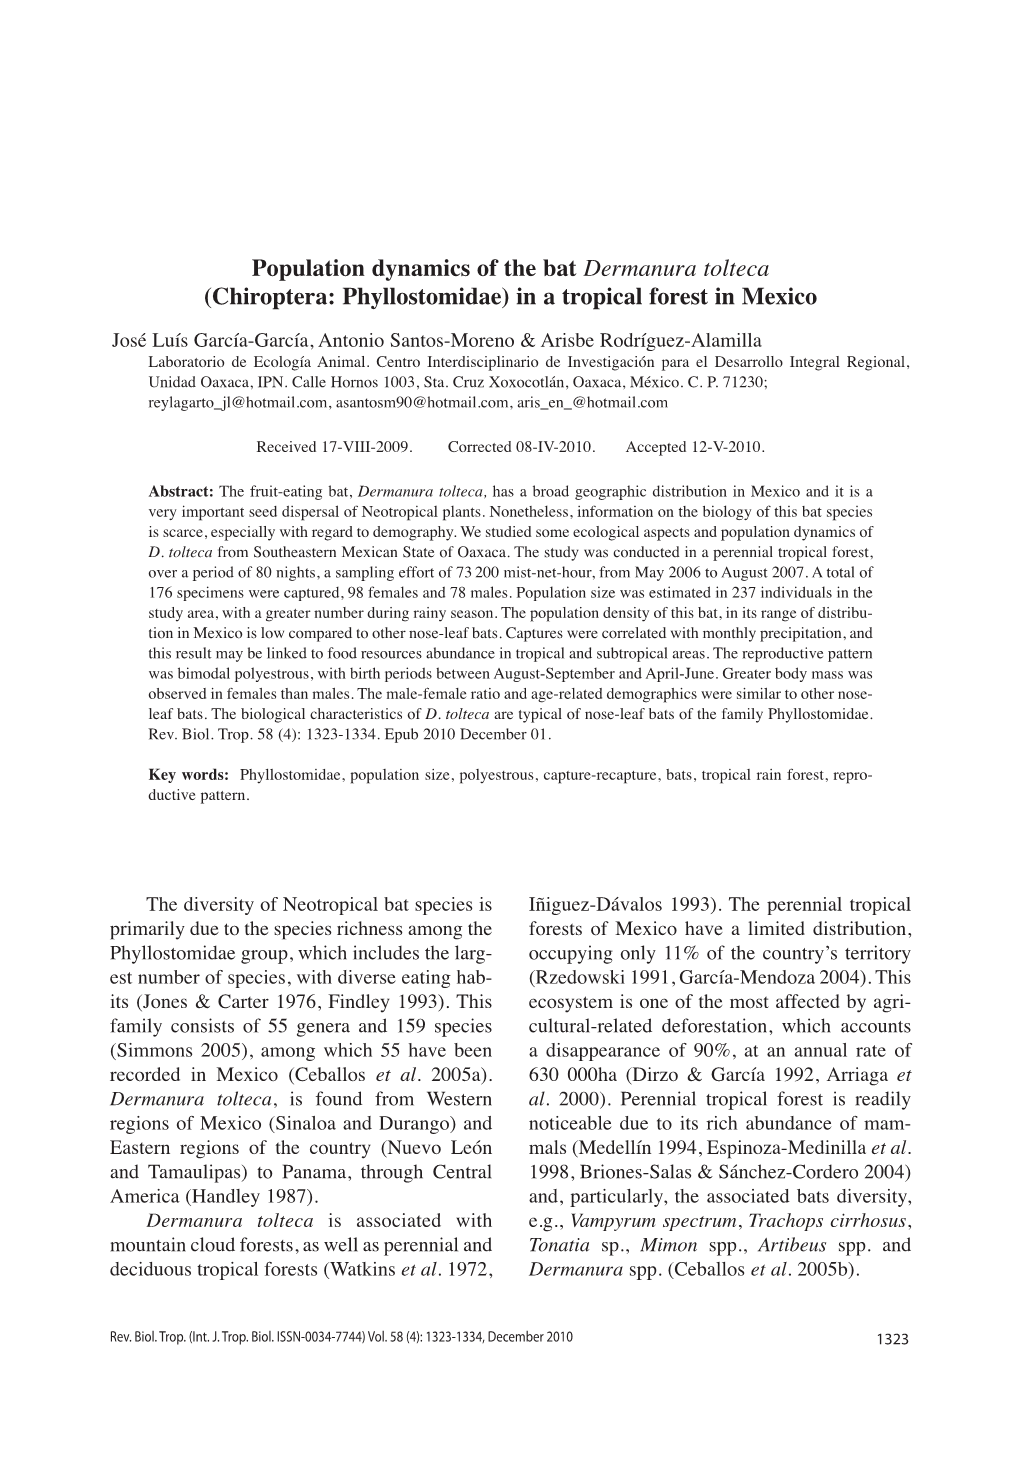 Population Dynamics of the Bat Dermanura Tolteca (Chiroptera: Phyllostomidae) in a Tropical Forest in Mexico